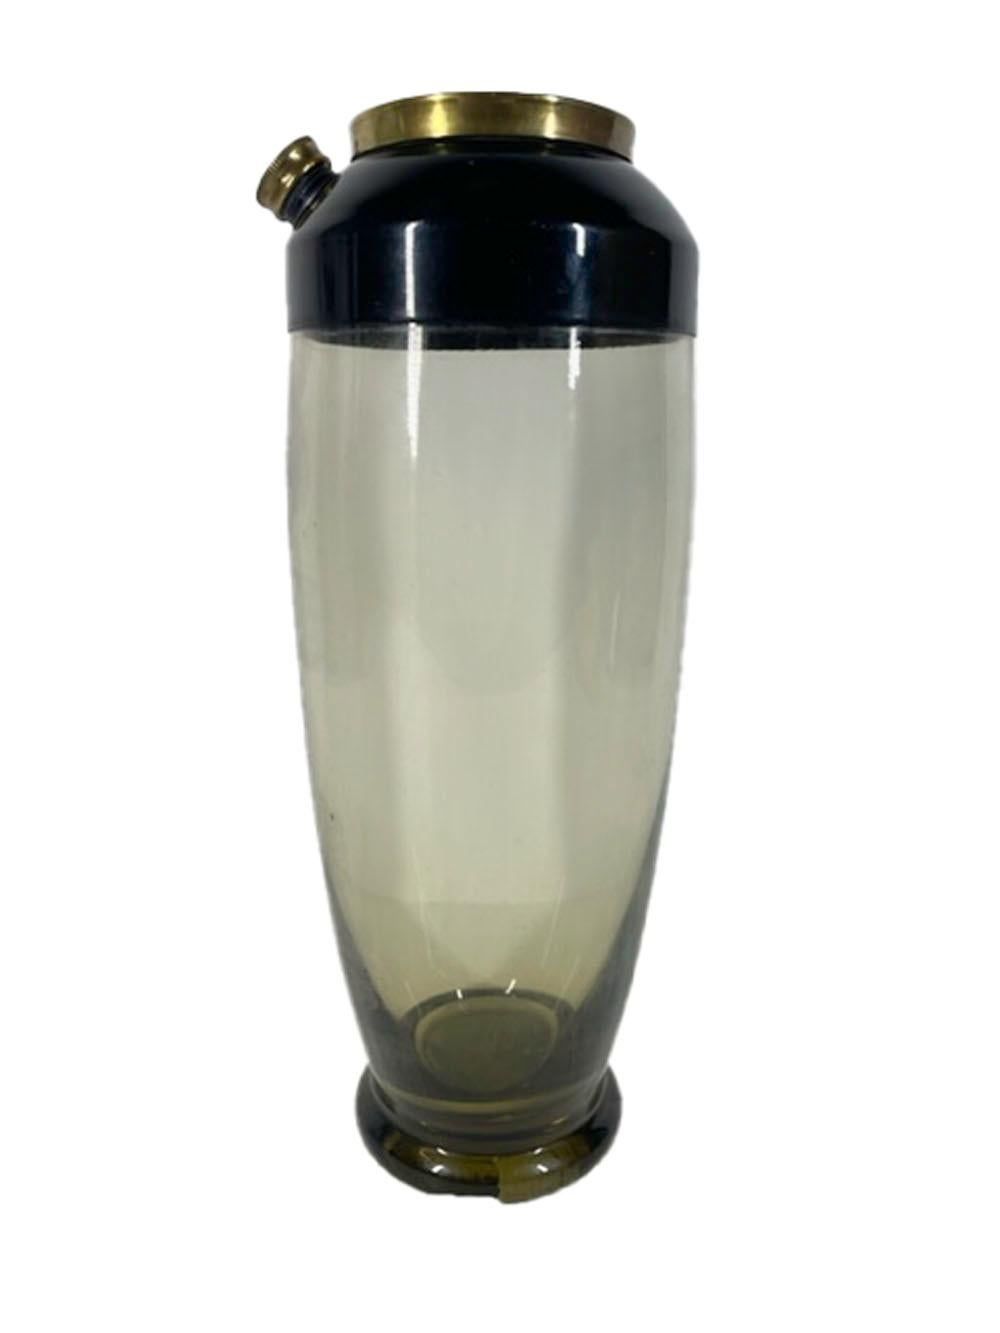 20th Century Art Deco Cocktail Shaker, Pale Olive Glass, Black Enameled Lid w/Brass Caps For Sale